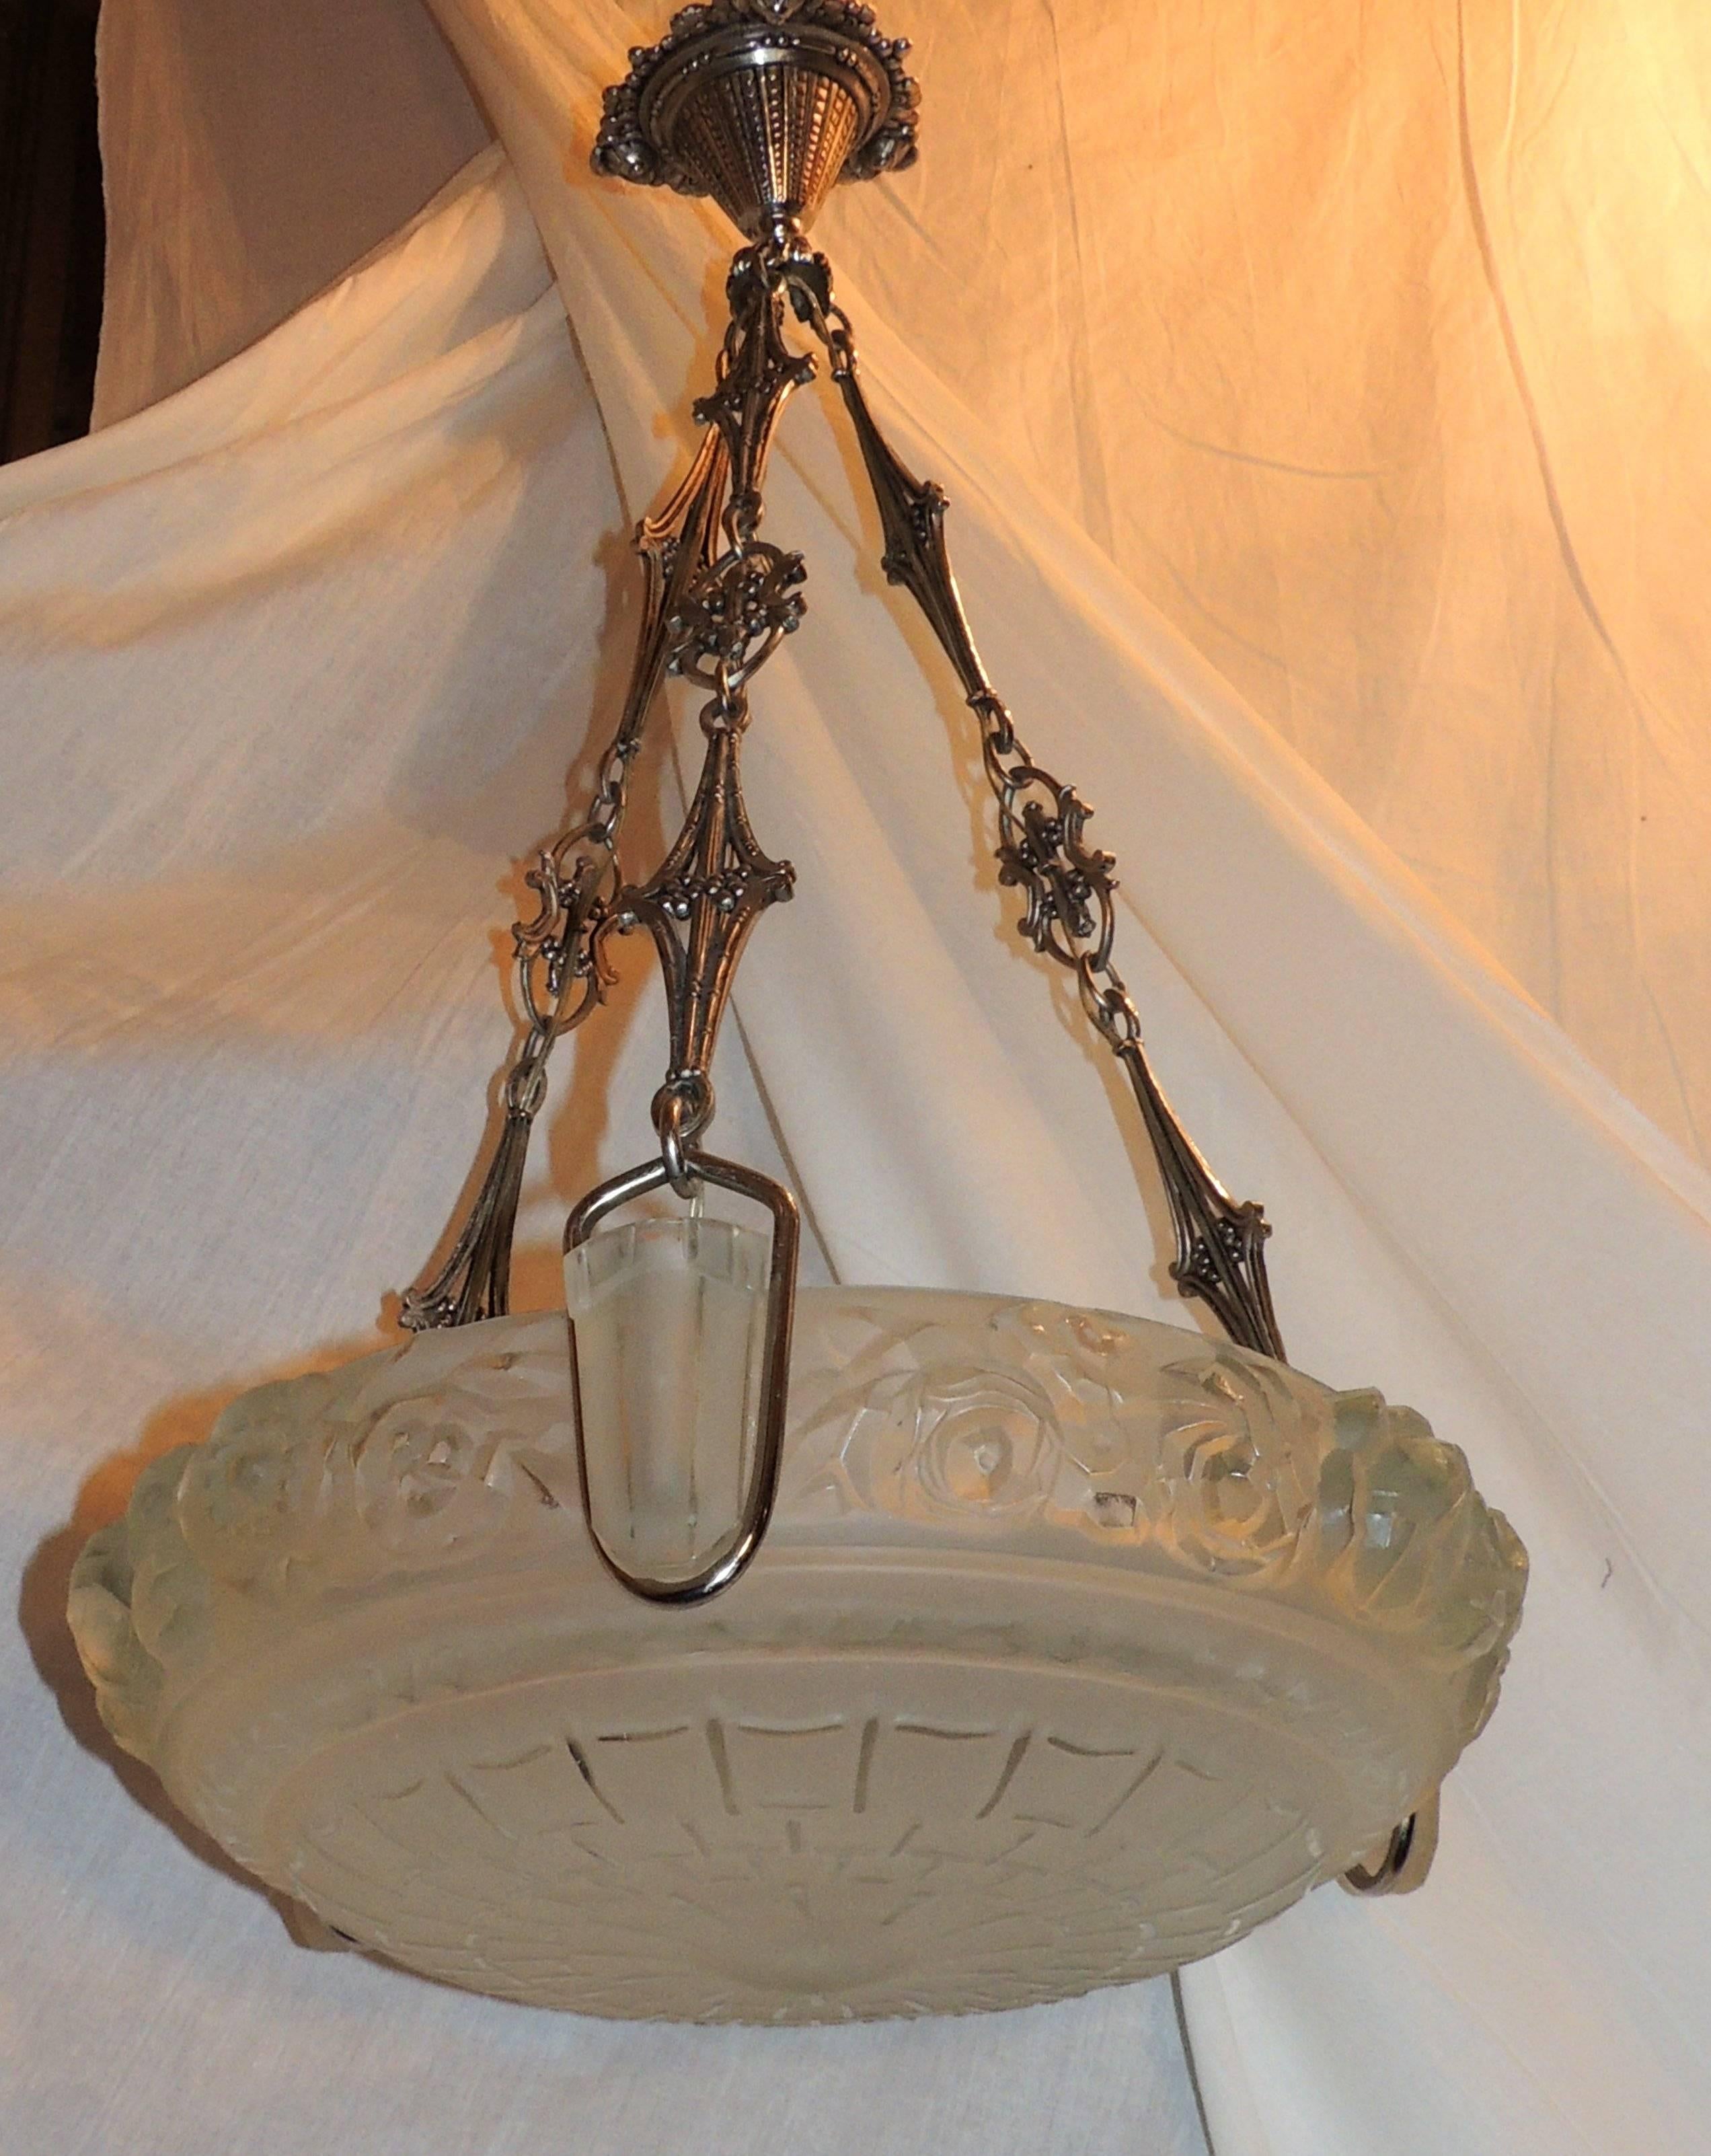 A wonderful French Art Deco signed chandelier by Sabino with floral frosted frosted opalescent art glass and ornate canopy and chain. The height is adjustable to what ever length you need. Fitted with three lights on the inside, maximum wattage per